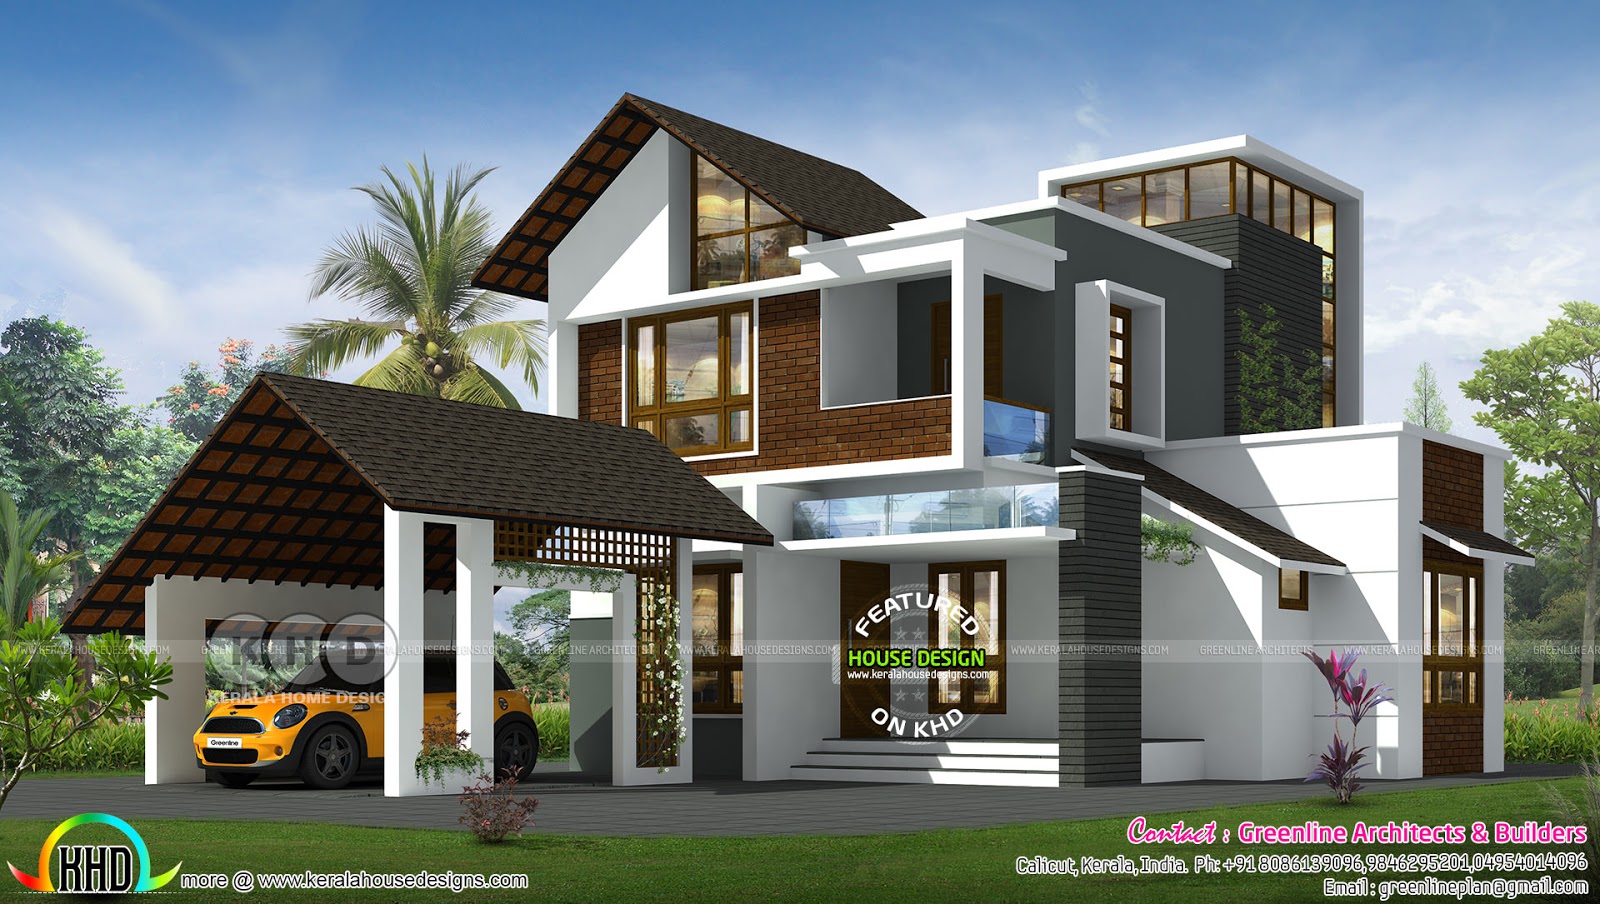 3 Bedroom 1942 Sq Ft Contemporary Mixed Roof House Kerala Home